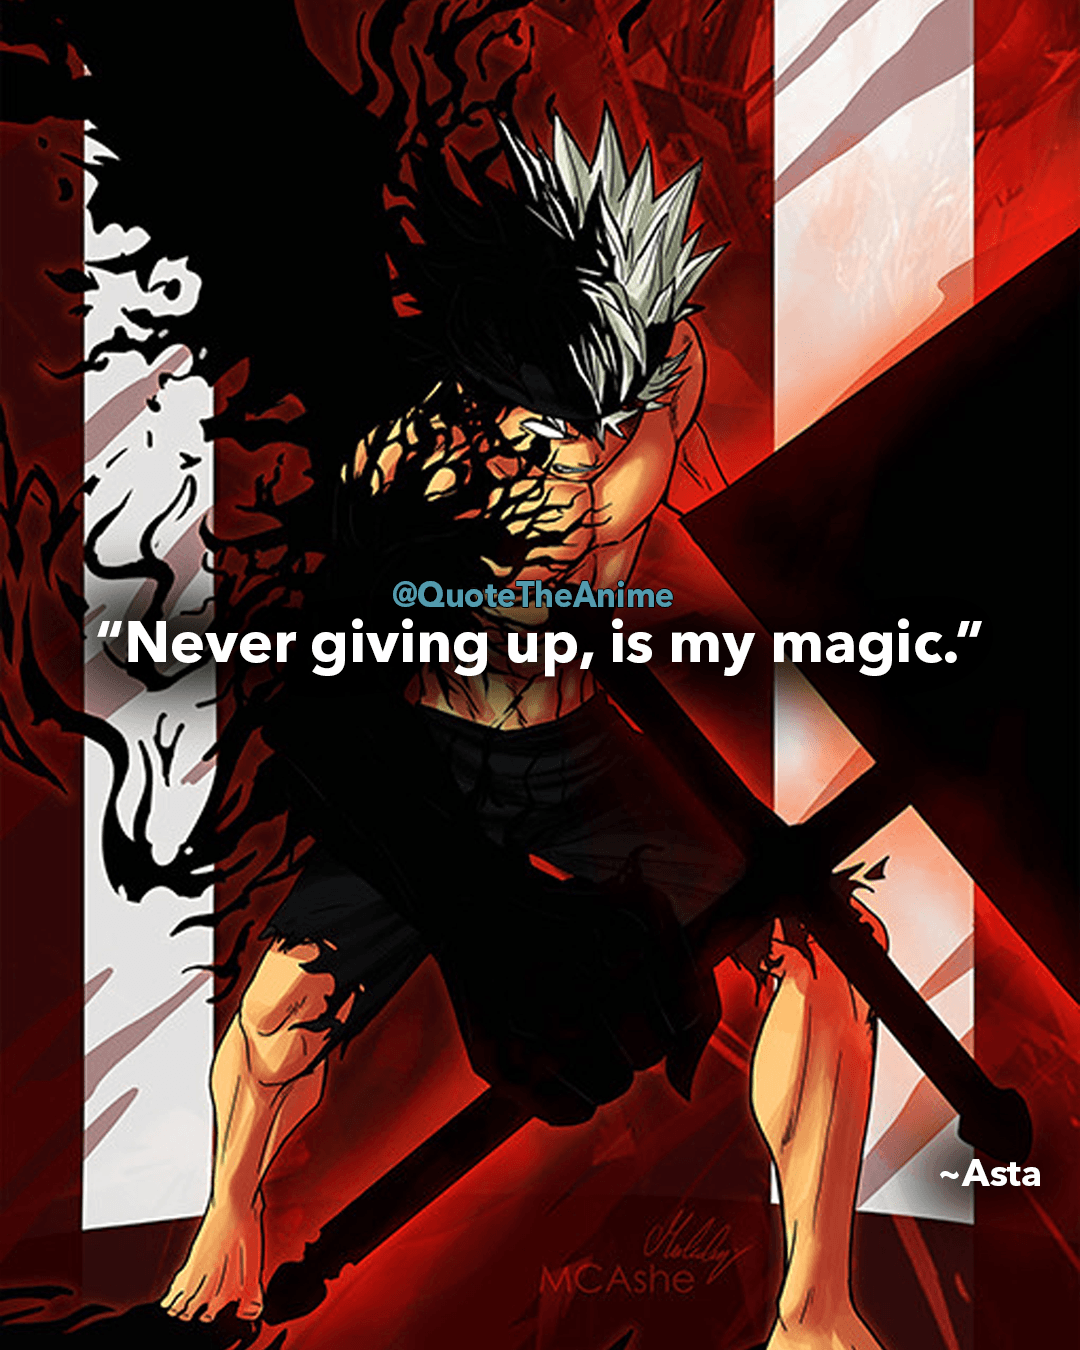 Black Clover Quotes Never Giving Up Is My Magic Asta - Black Clover Asta  Demon - 1080x1350 Wallpaper 